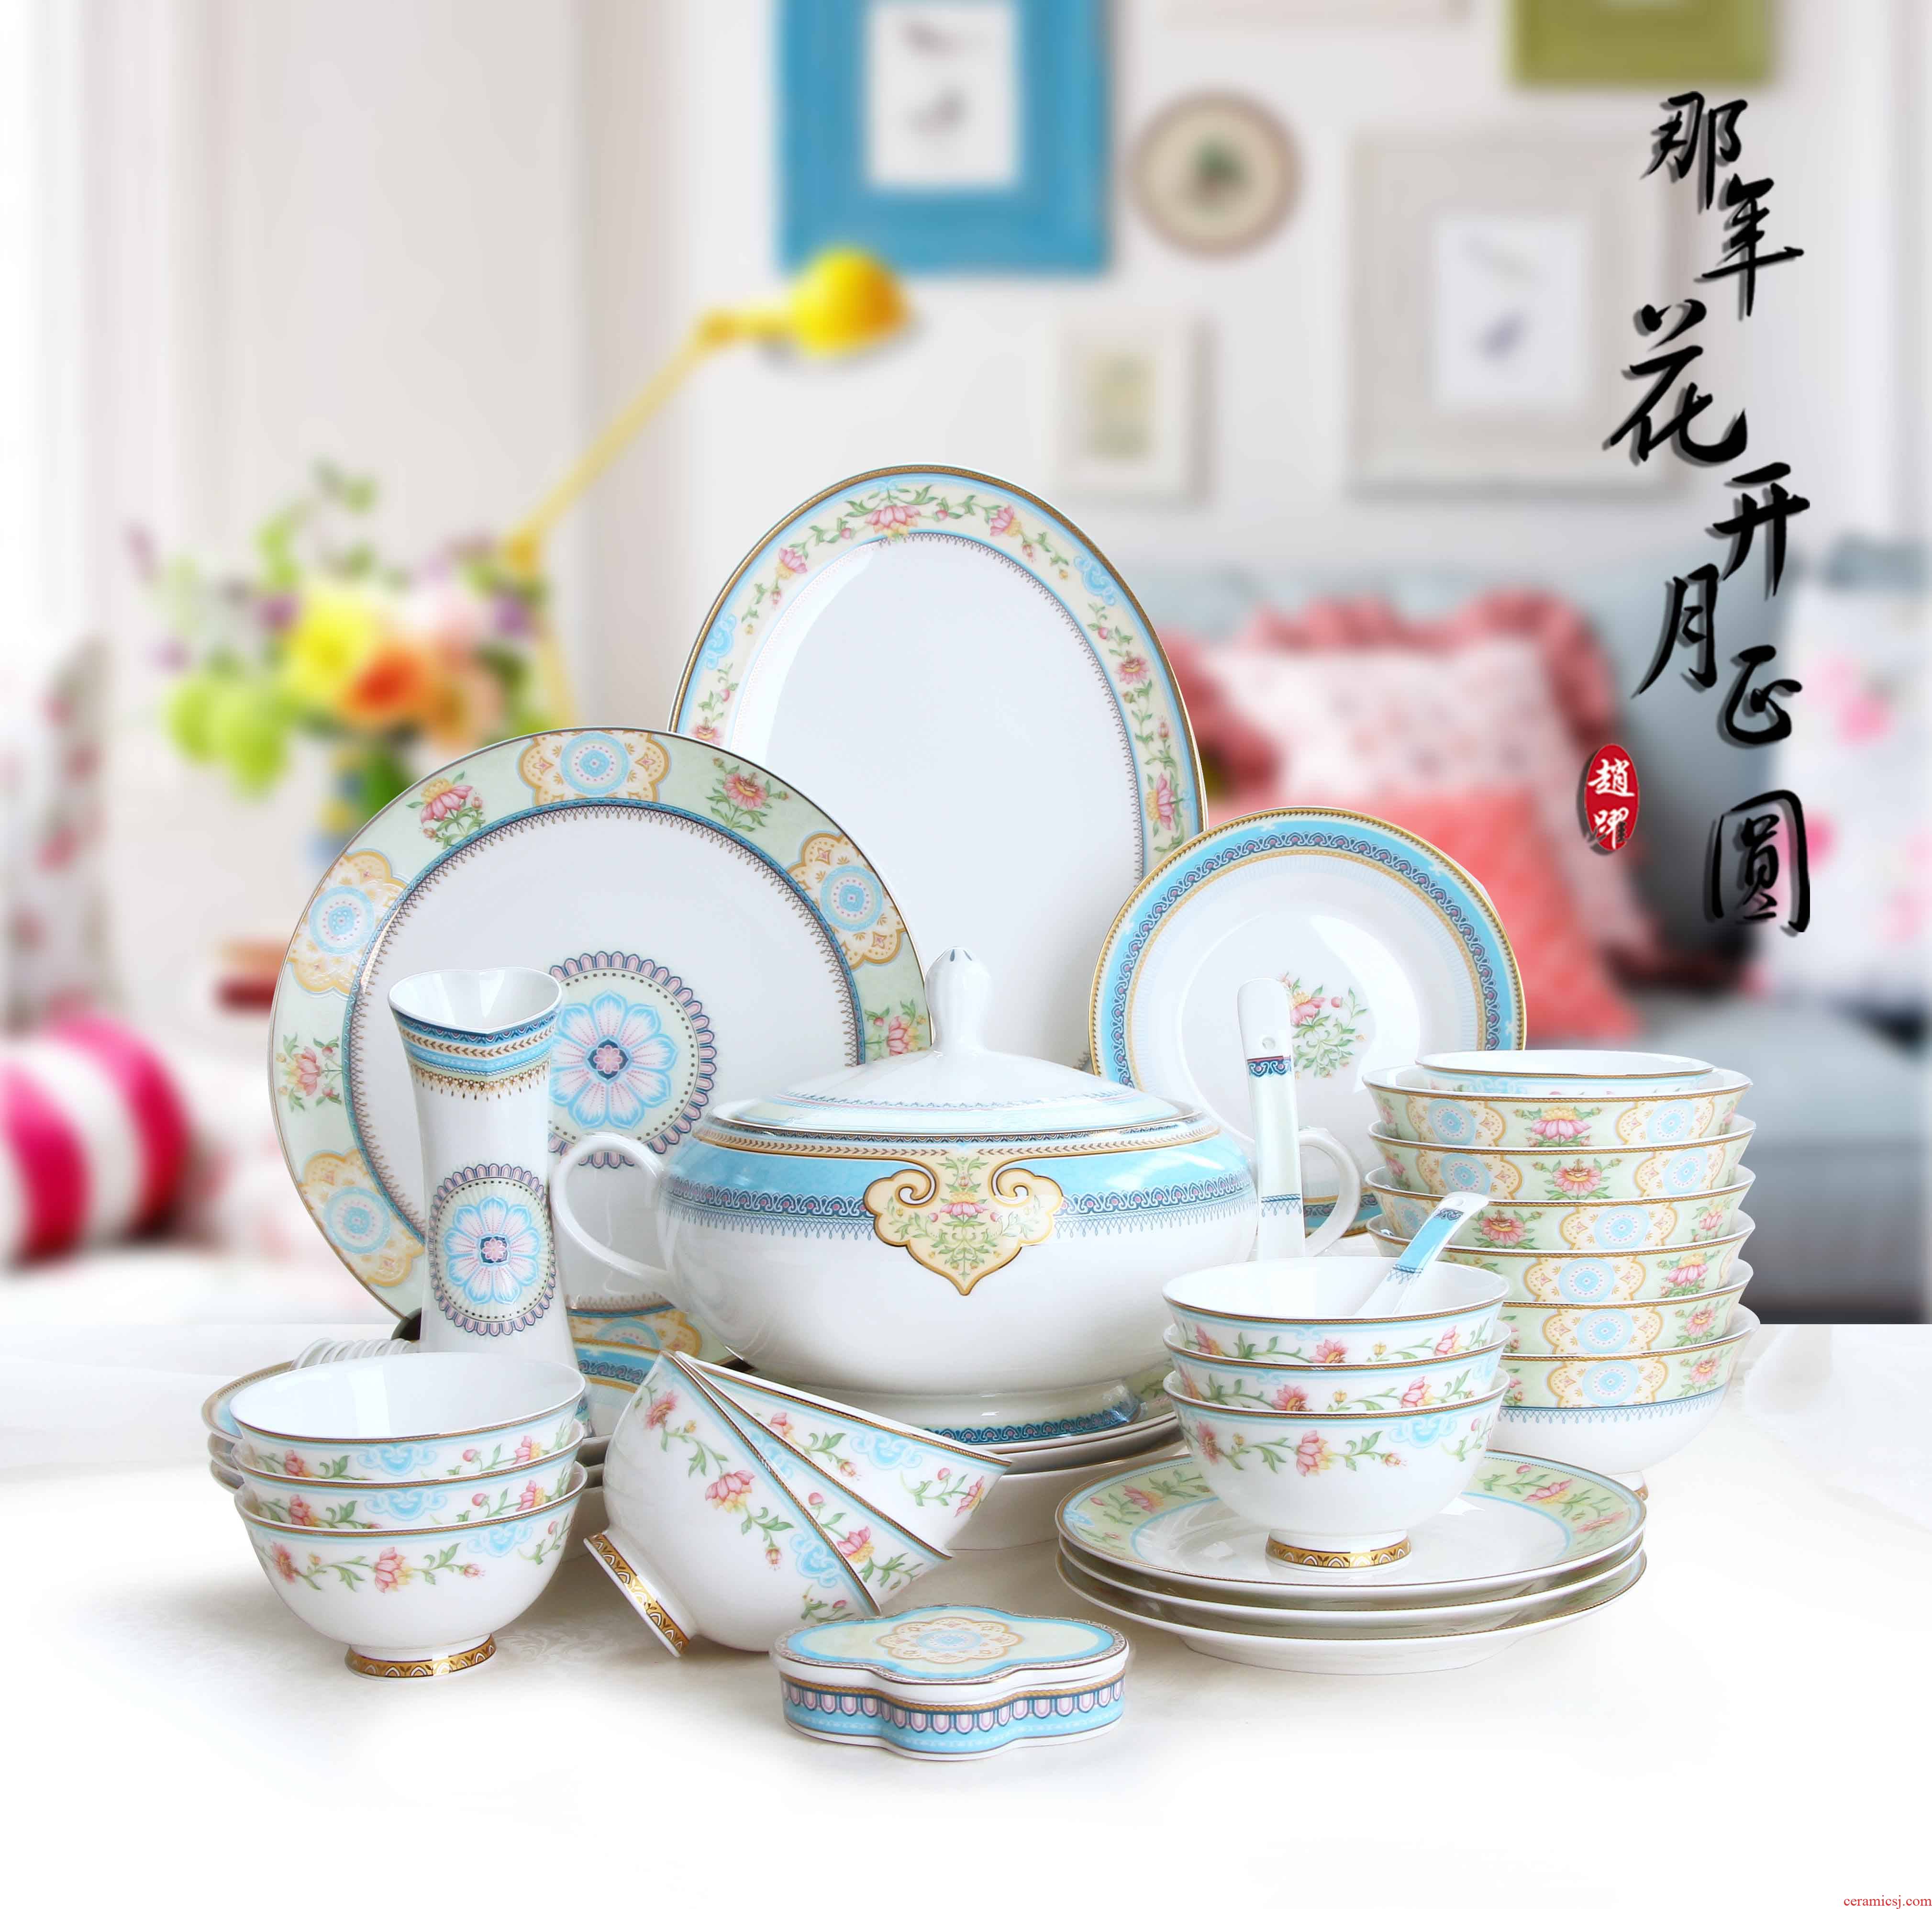 Tang Shanhong rose ipads China tableware suit lead - free home dishes dish of fruit and fresh porcelain gift boxes